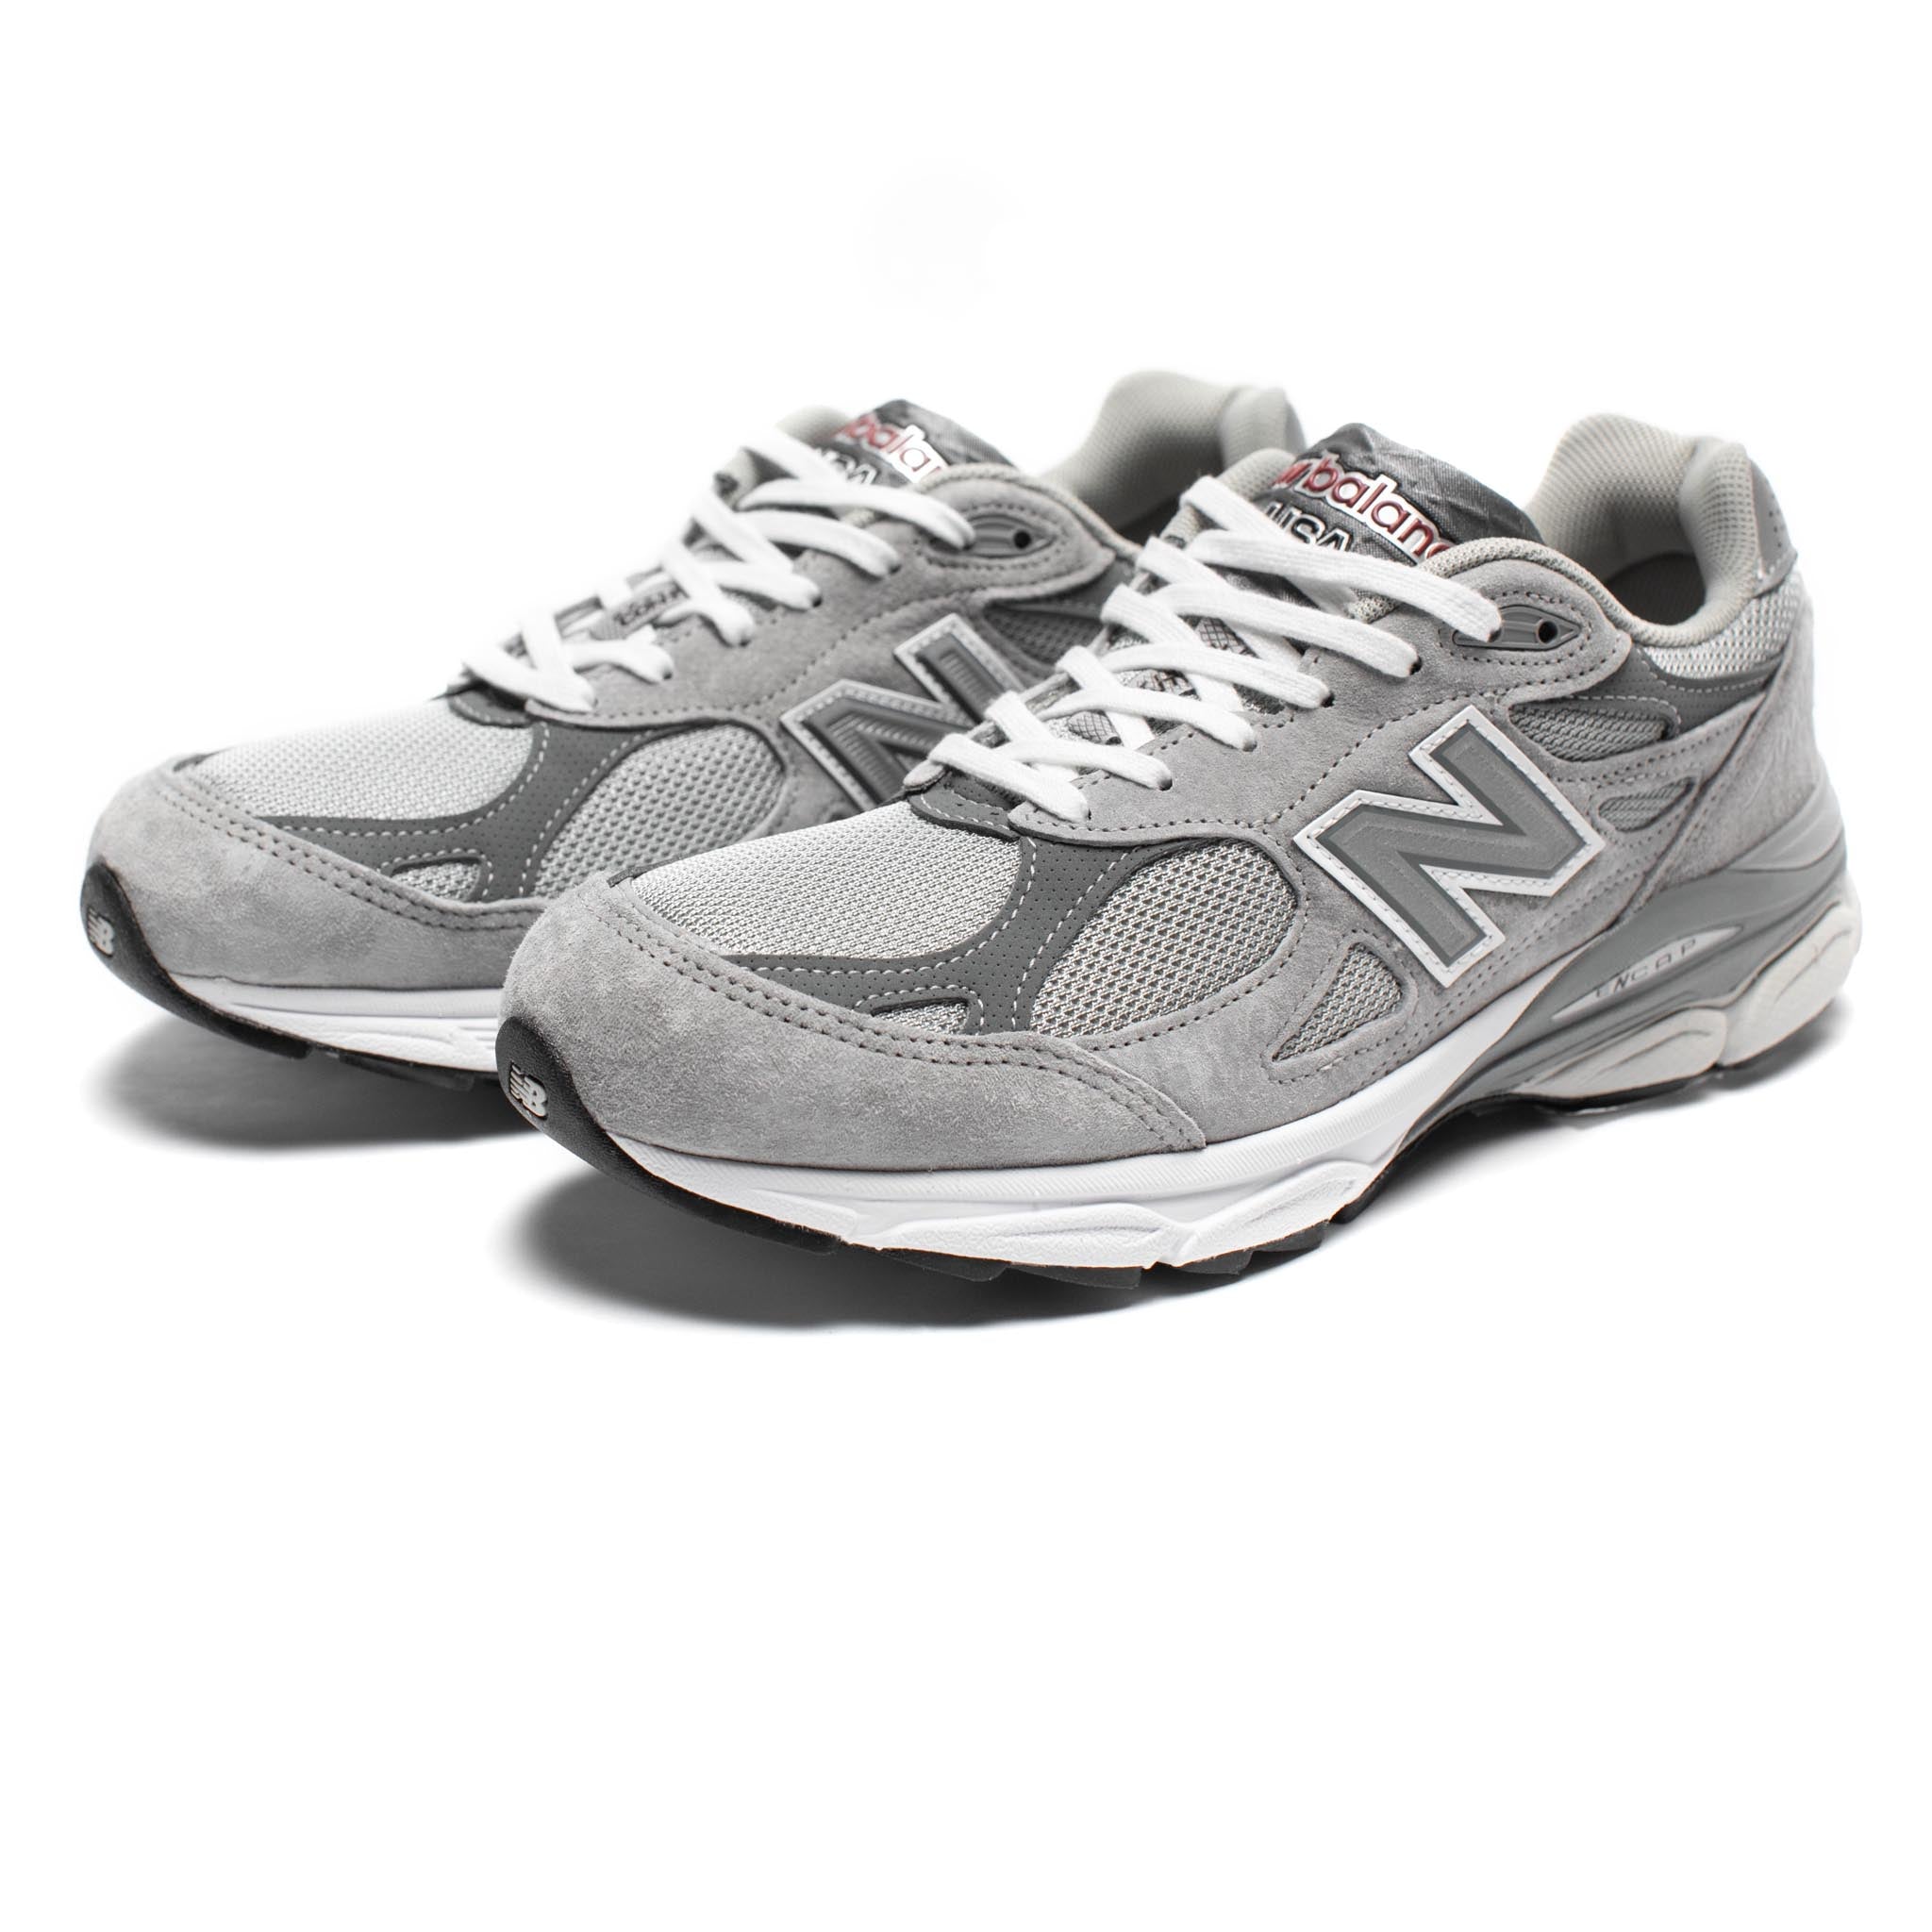 New Balance 'Made in USA' M990GY3 Grey & SNEAKERBOX